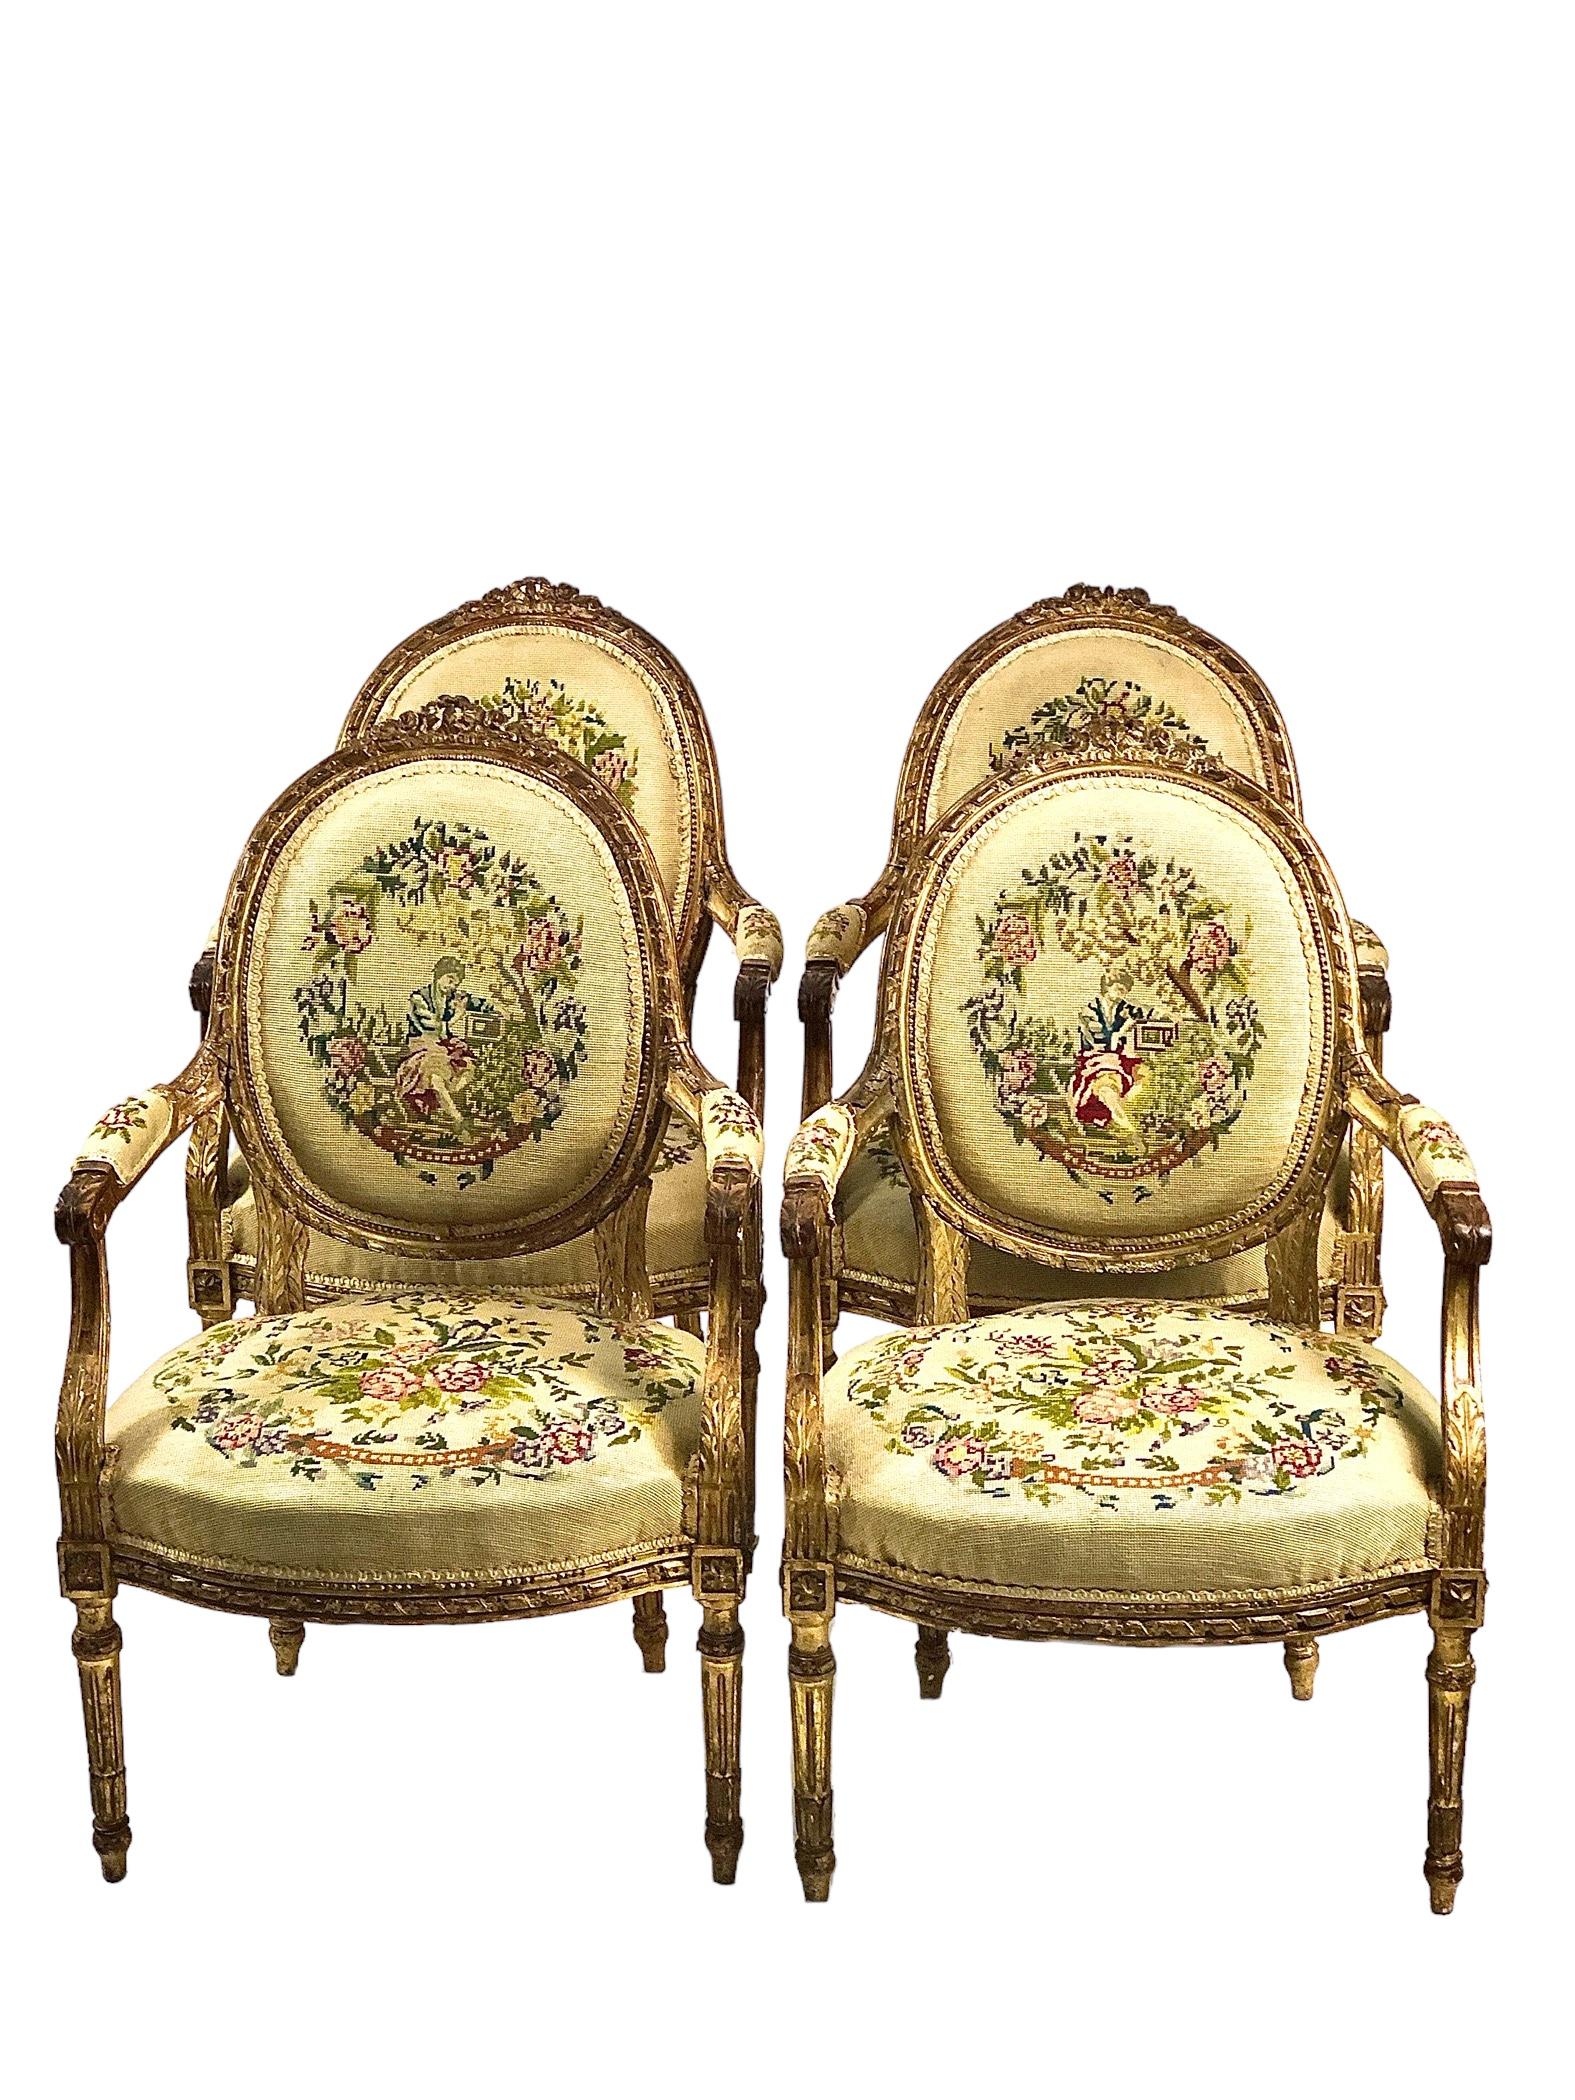 An exquisite suite of richly carved giltwood salon furniture in the Louis XVI style, comprising four oval back 'Fauteuil Cabriolet' armchairs and a matching two-seater sofa. Each chair in this elegant set is upholstered on the back and seat and arm